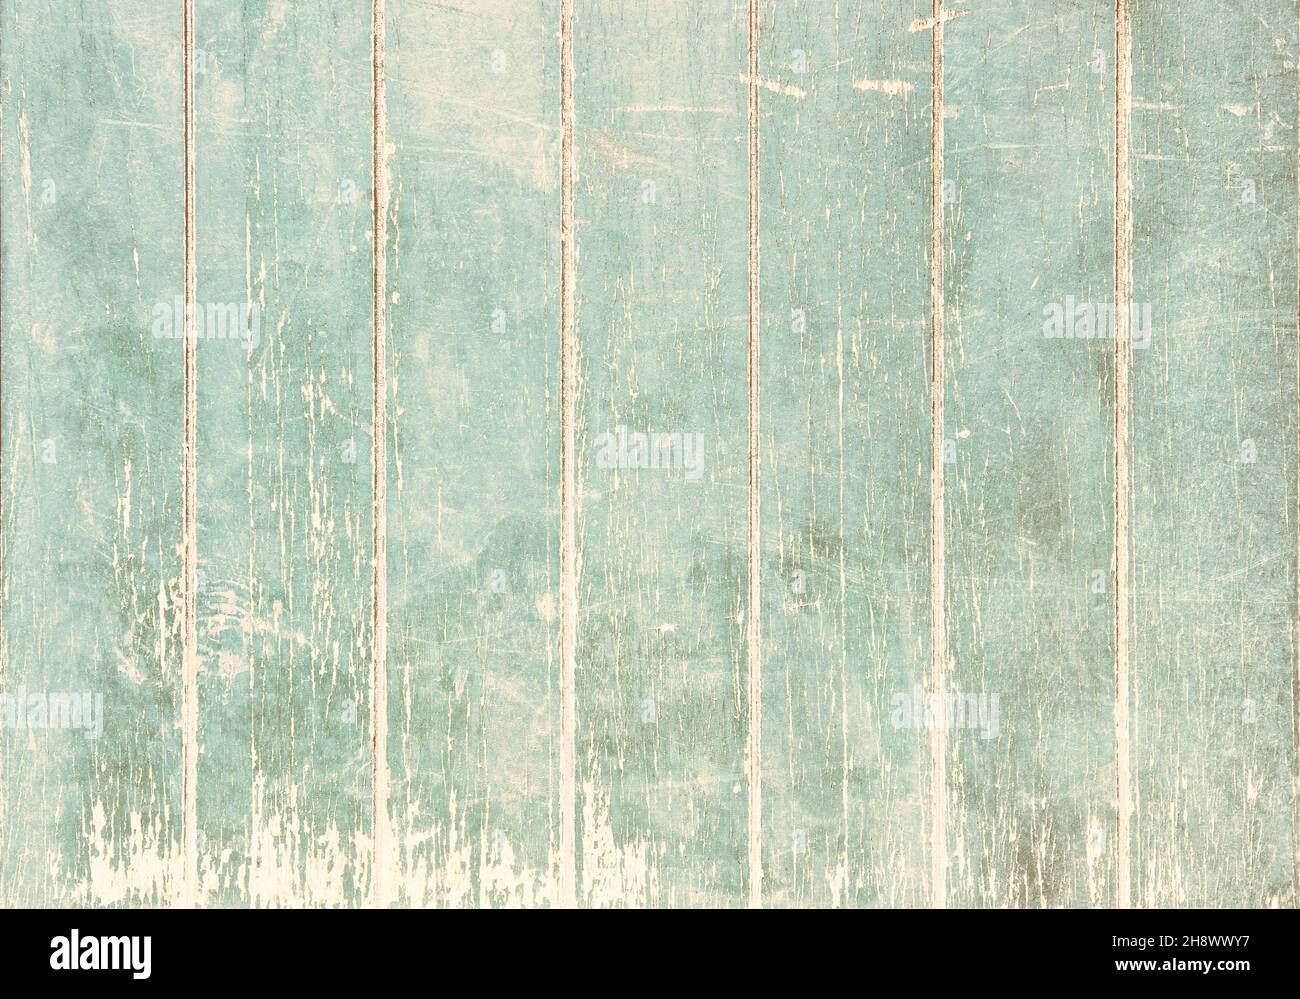 Old distressed wooden background. Rustic vintage wood texture Stock Photo